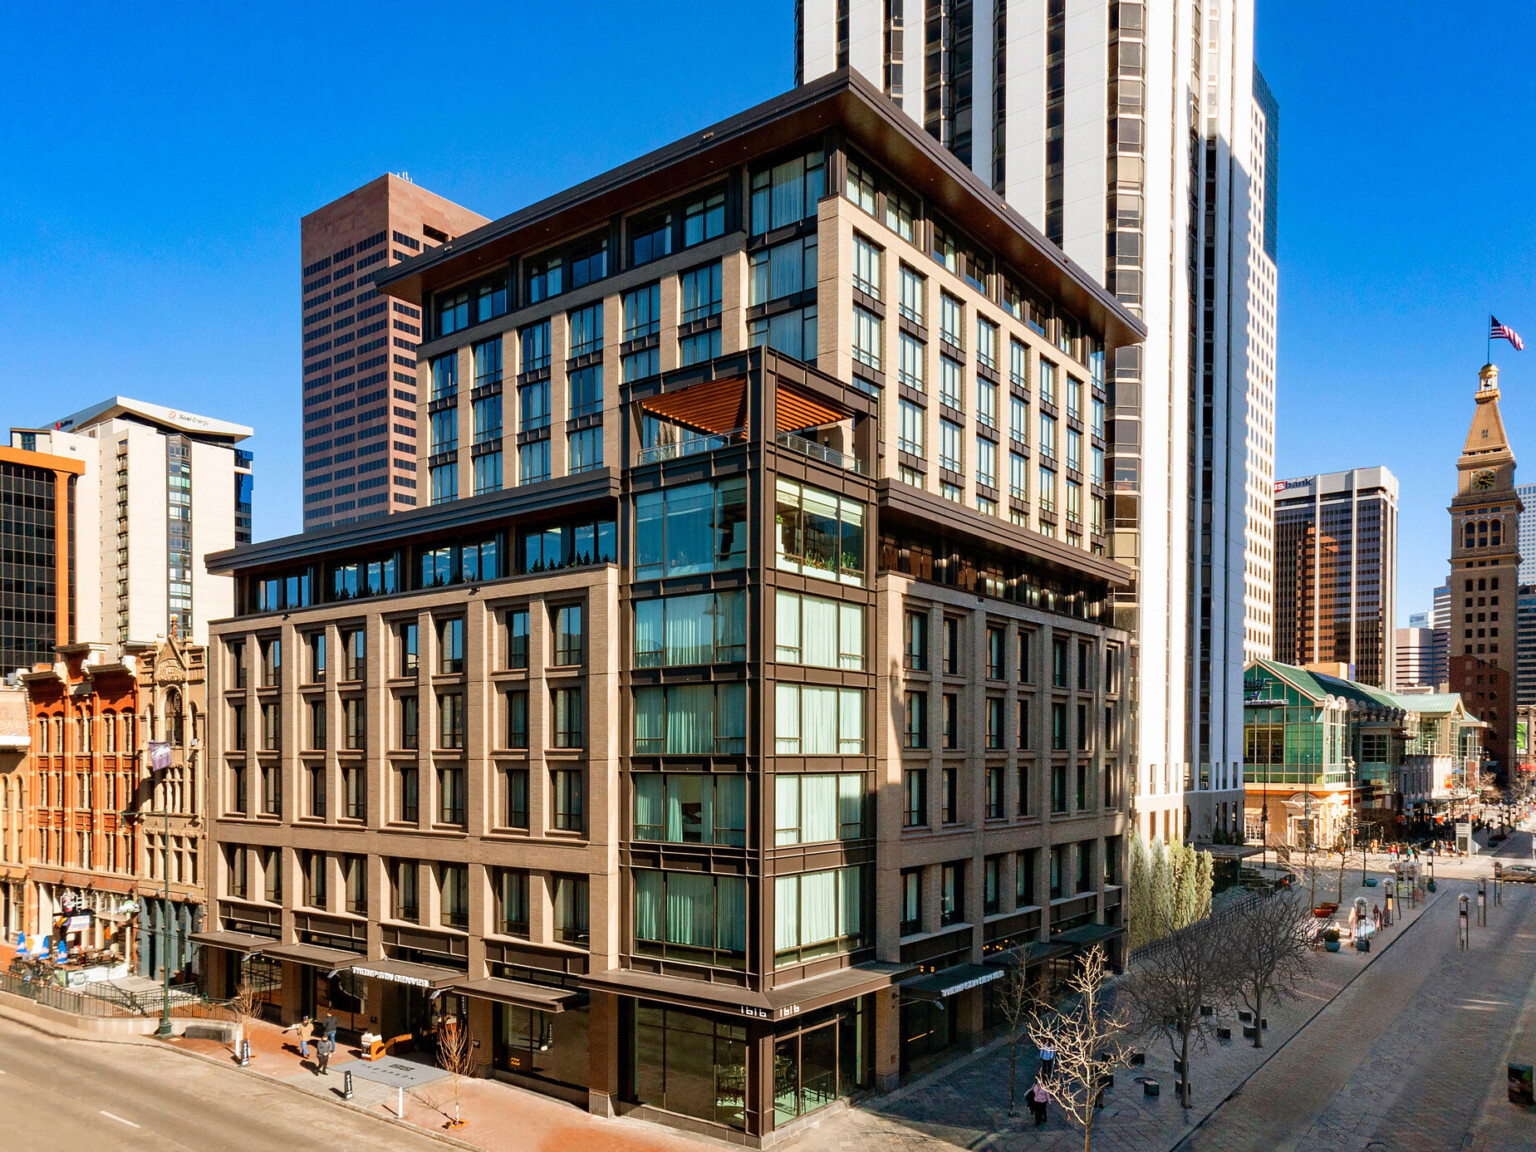 The Thompson Hotel Denver seen from corner with glass tower and stone facade on each side